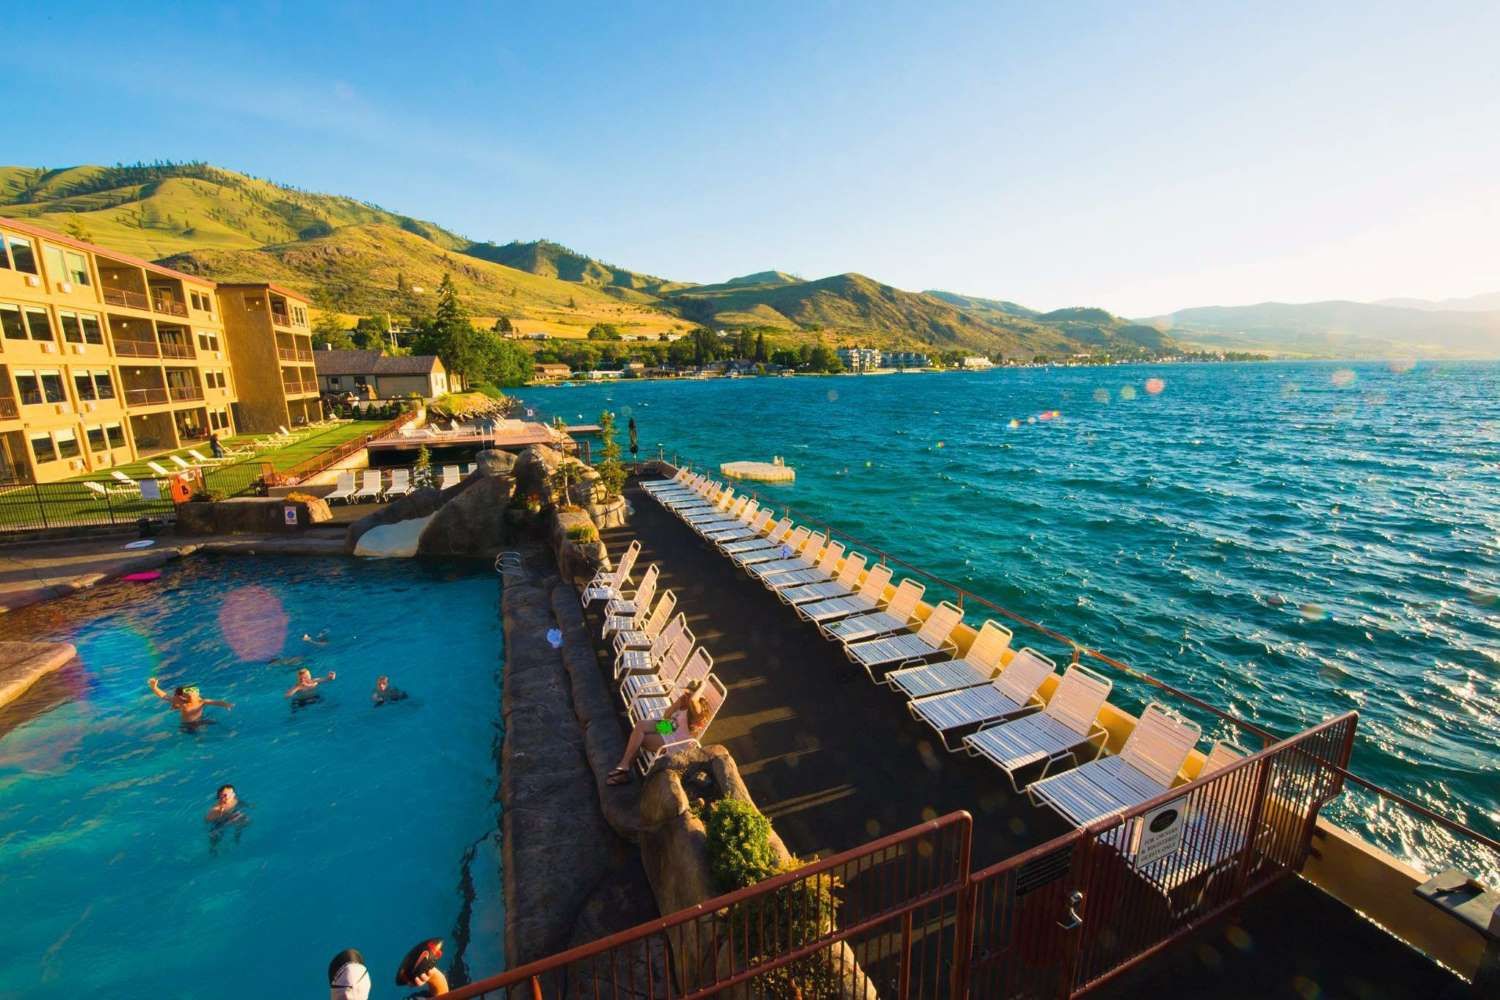 A lakeside resort with a pool and lounge chairs with a mountainous backdrop representing budget-friendly vacation destinations with low travel and accommodation costs.